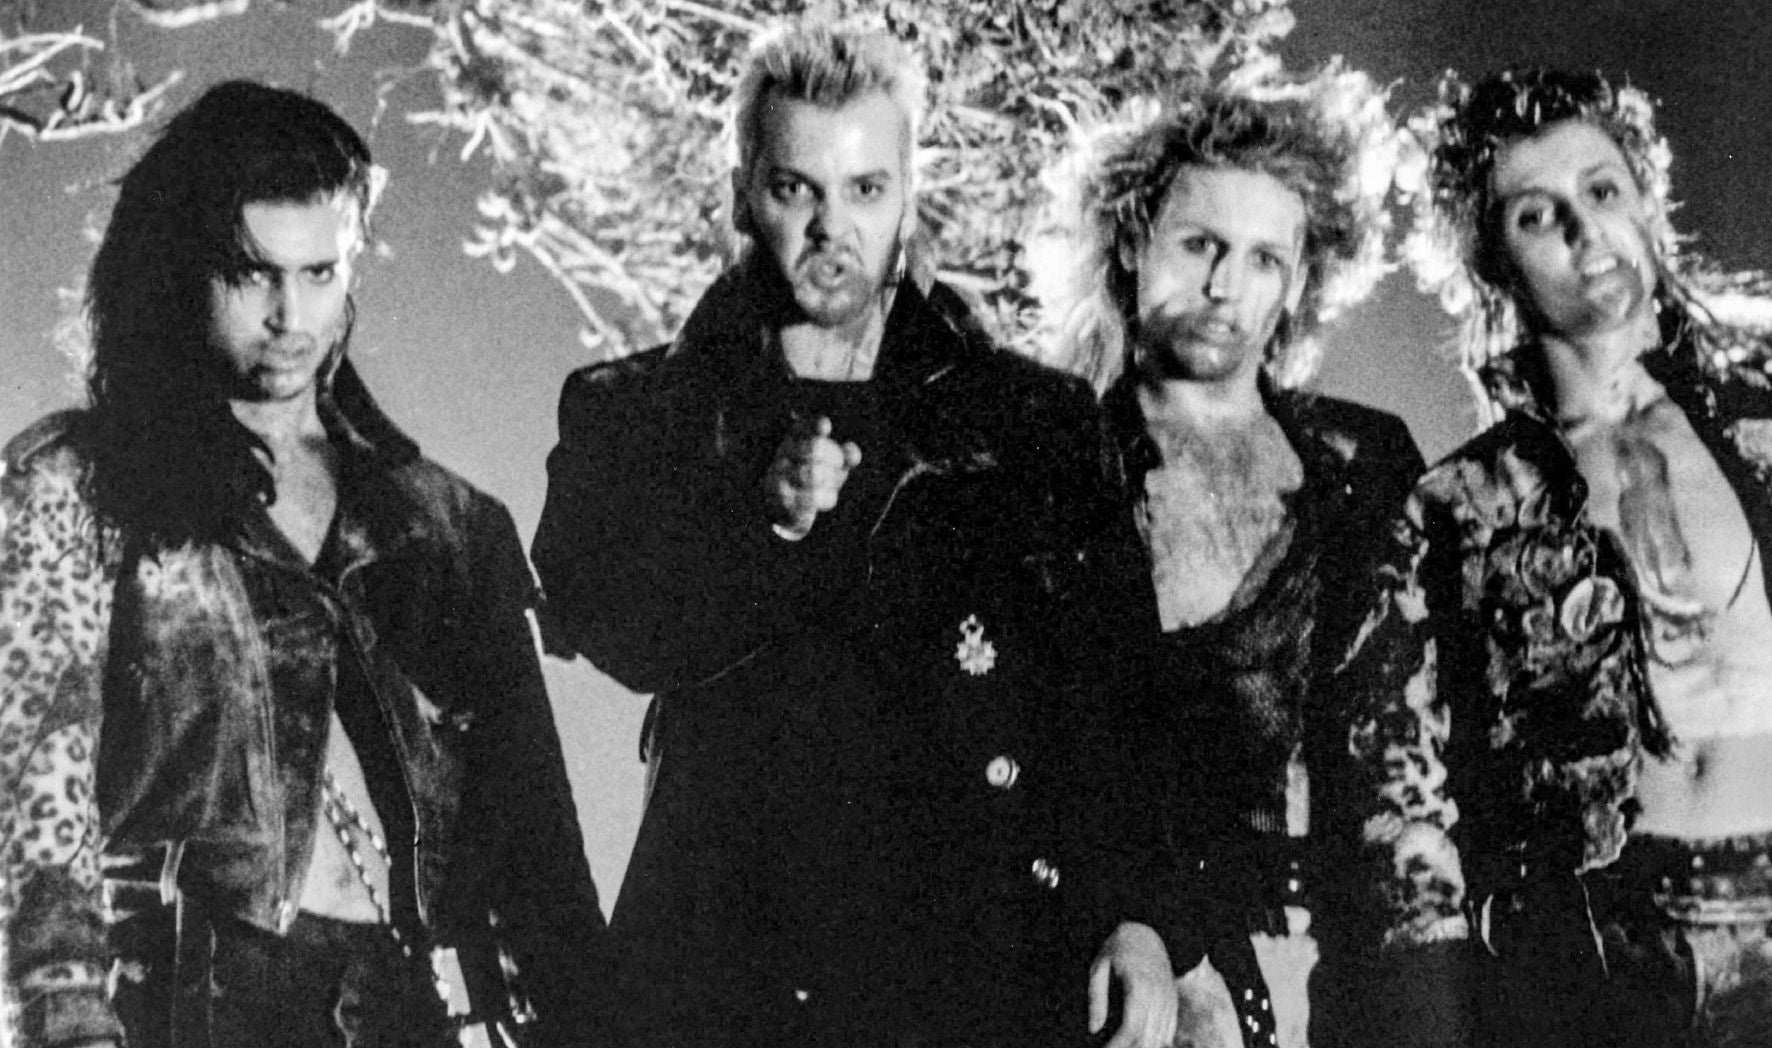 FRIGHT NITE FRIDAY WITH FRITZ! The Lost Boys (1987)